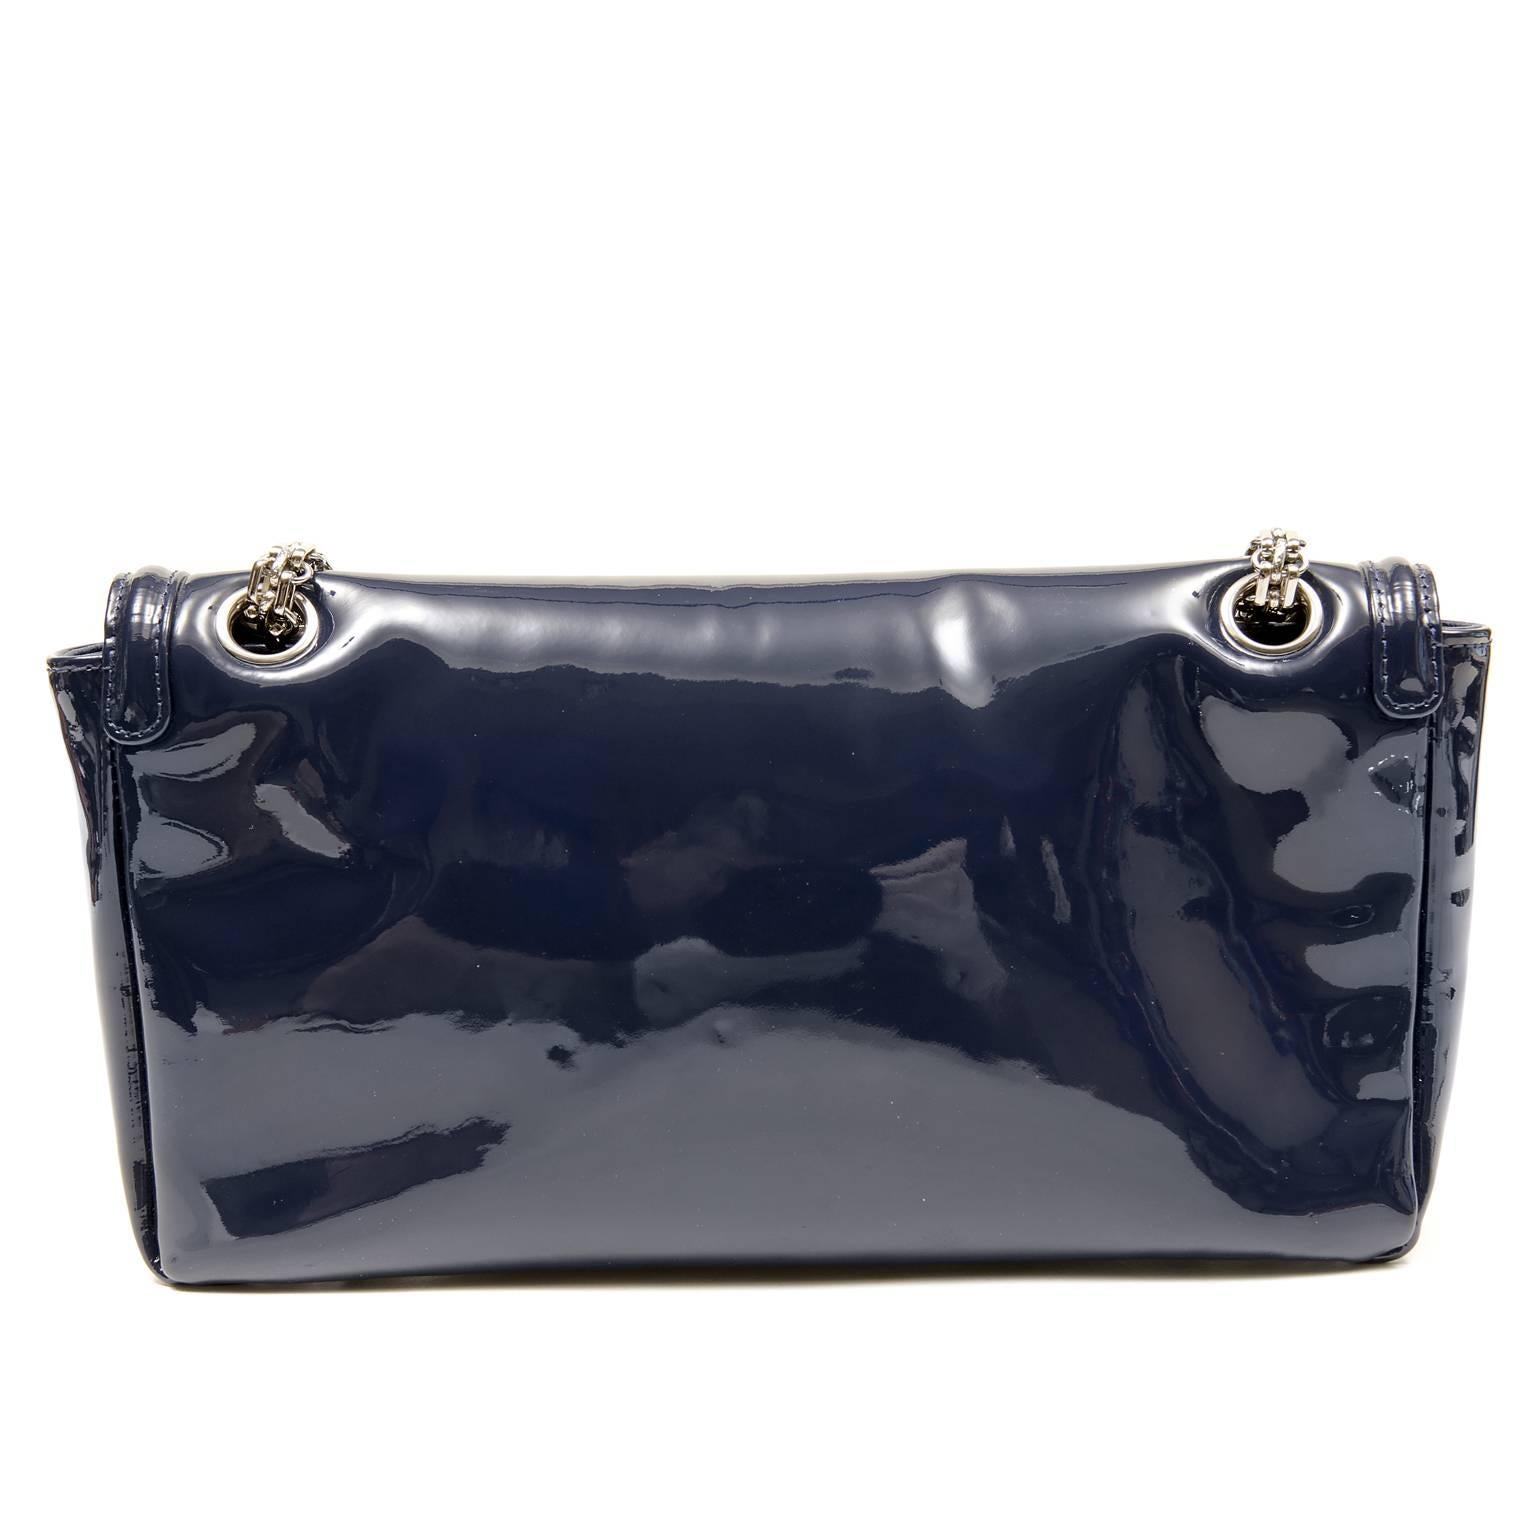 Chanel Navy Patent Multi Chain Reissue Flap Bag- PRISTINE, appearing never  carried. 
 The artfully linked chain strap adds creative flair to this collectible Chanel.  
Deep navy blue patent leather has a glossy and durable finish.  Silver